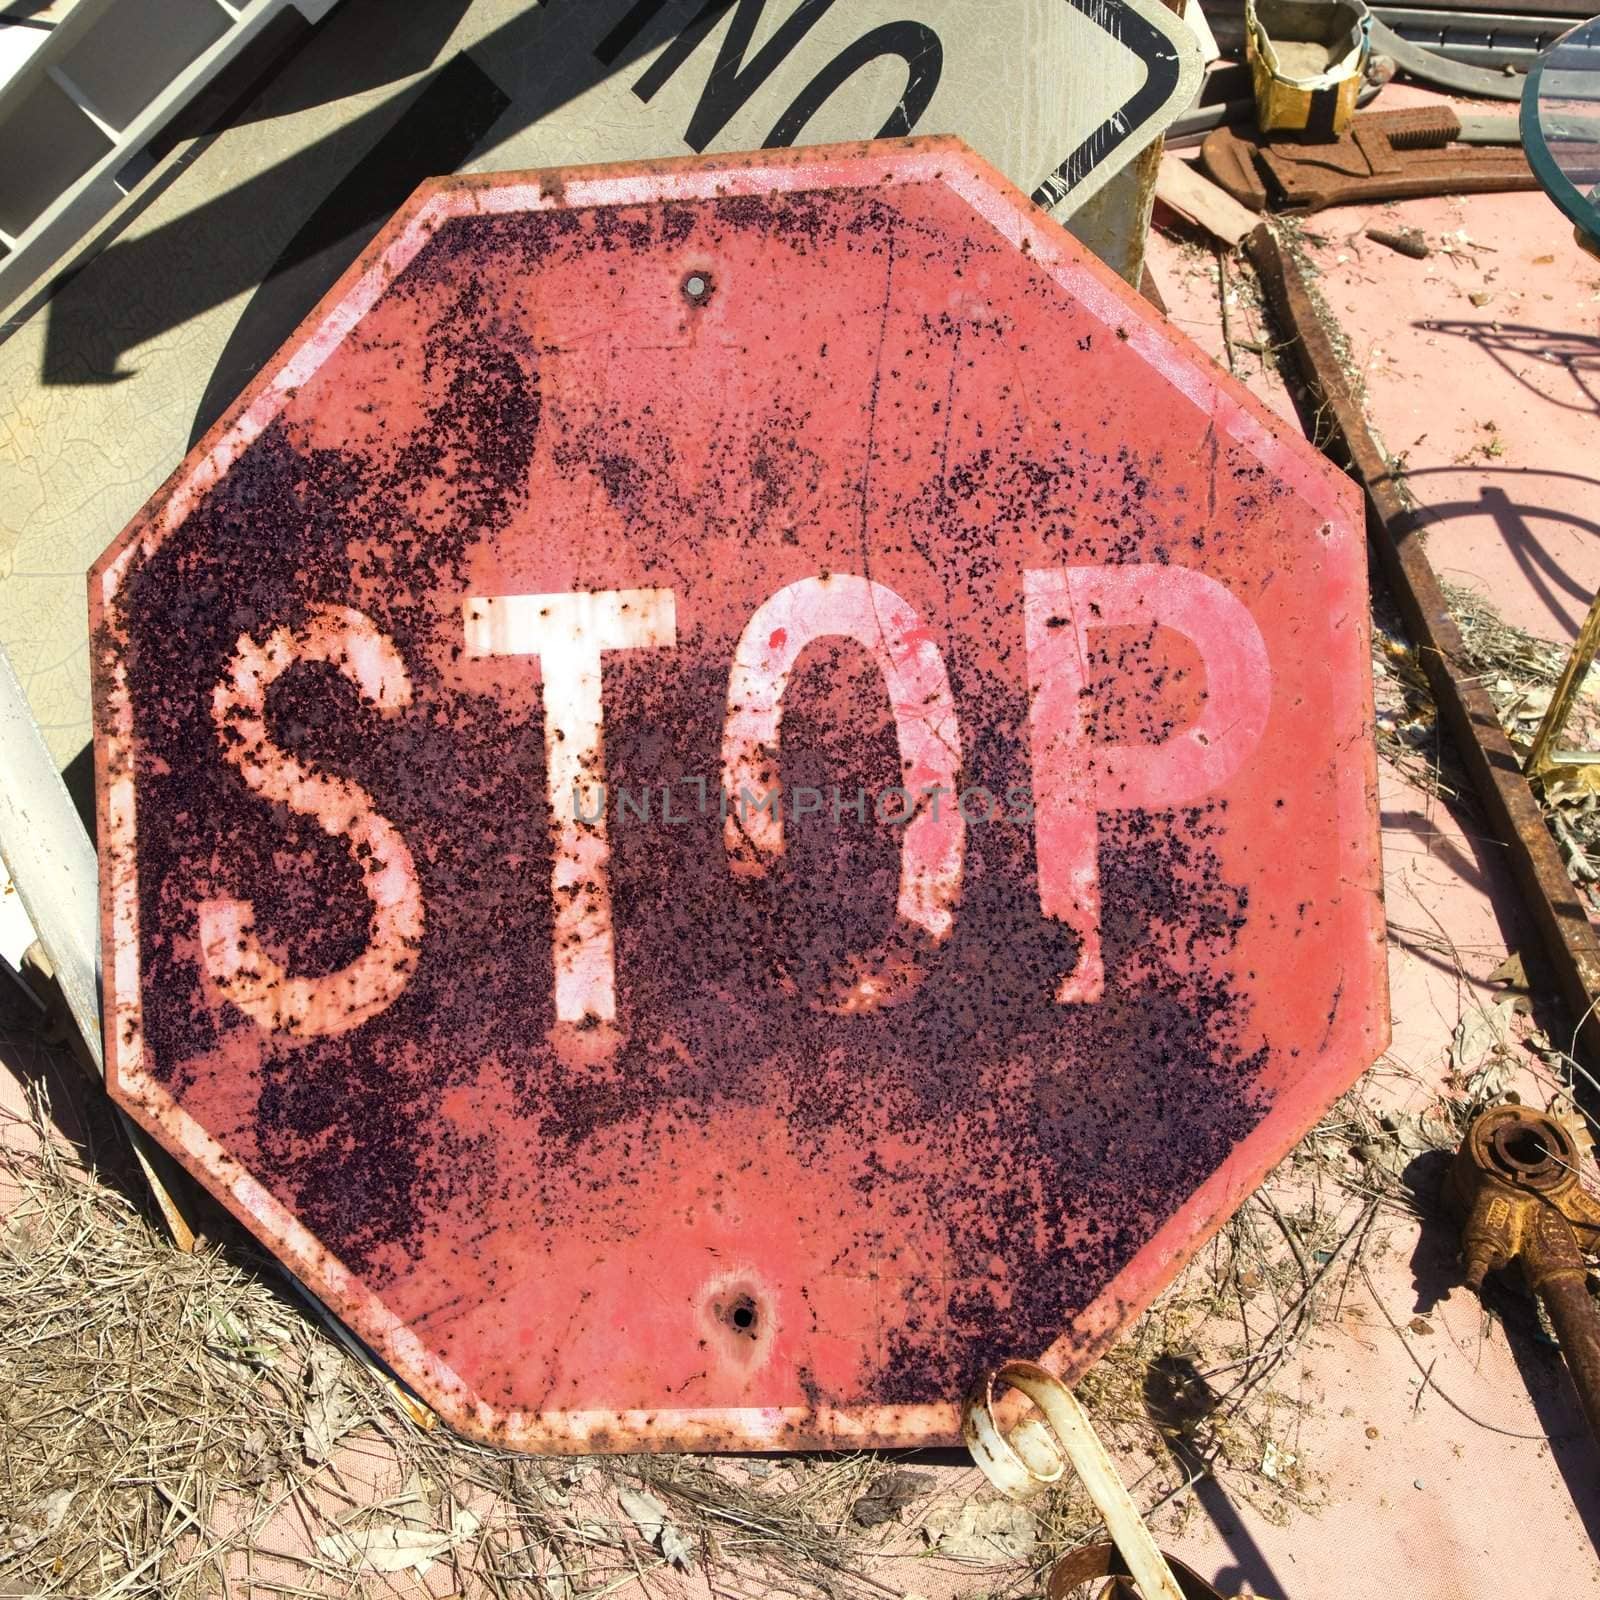 Rusty old stop sign on ground.